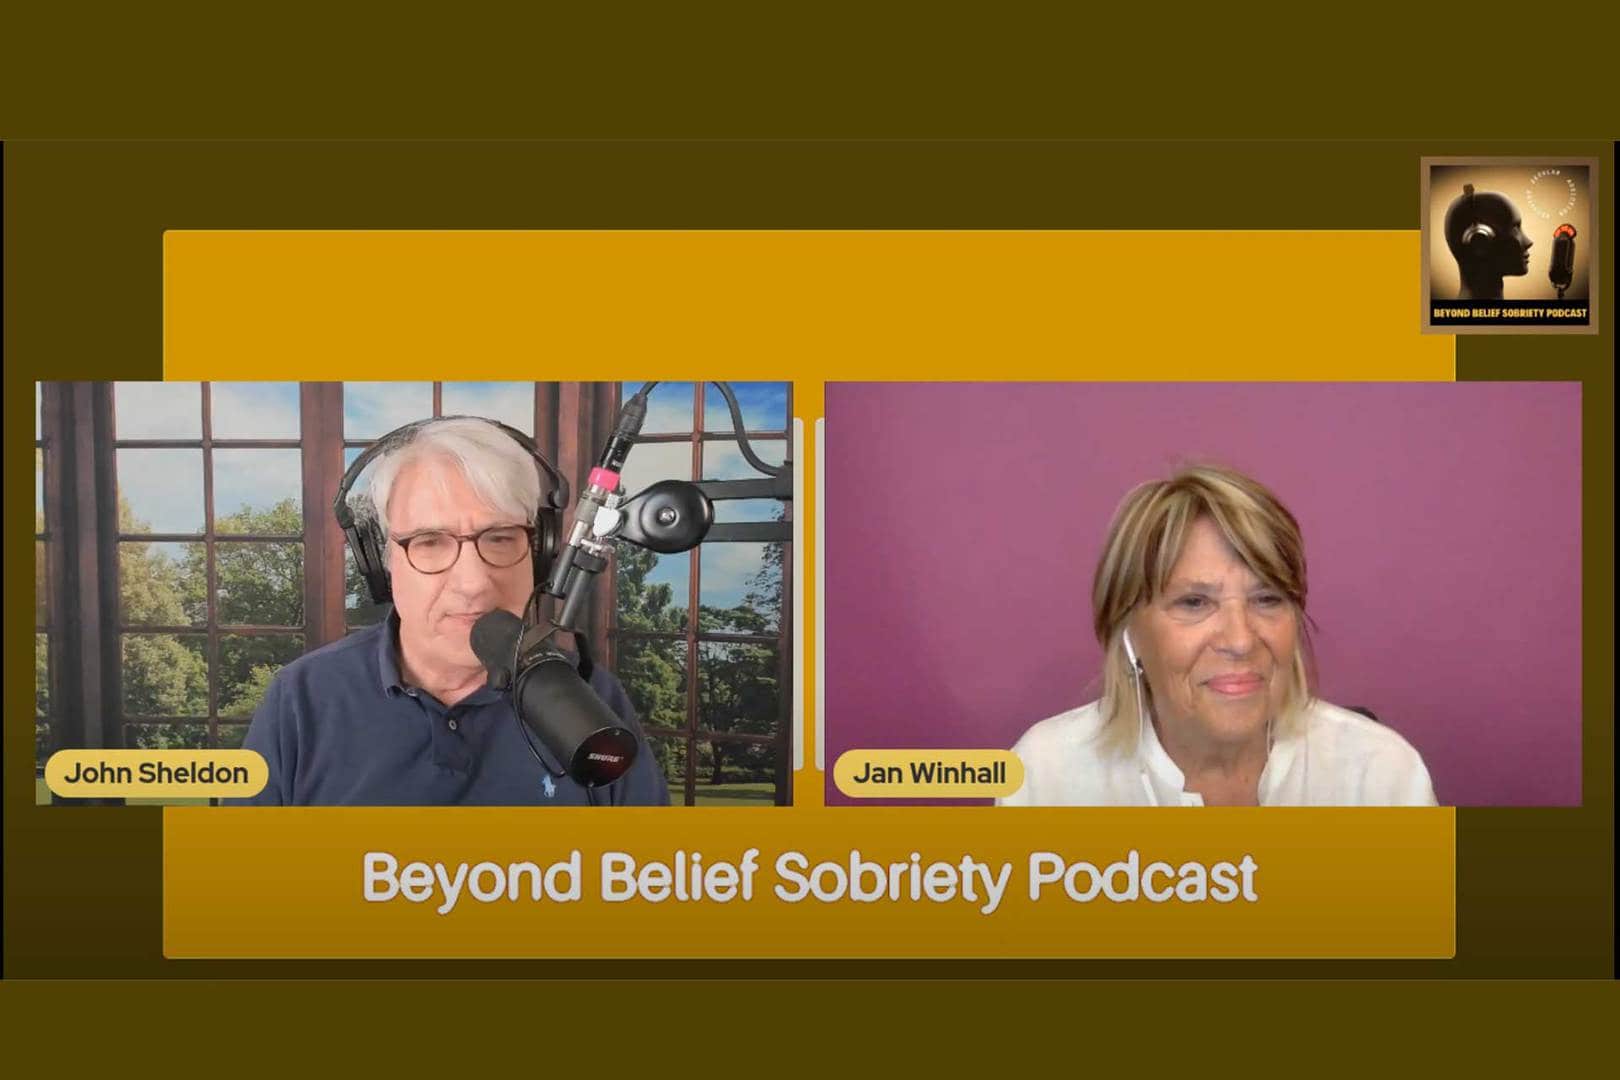 beyond-belief-sobriety-podcast episode cover image